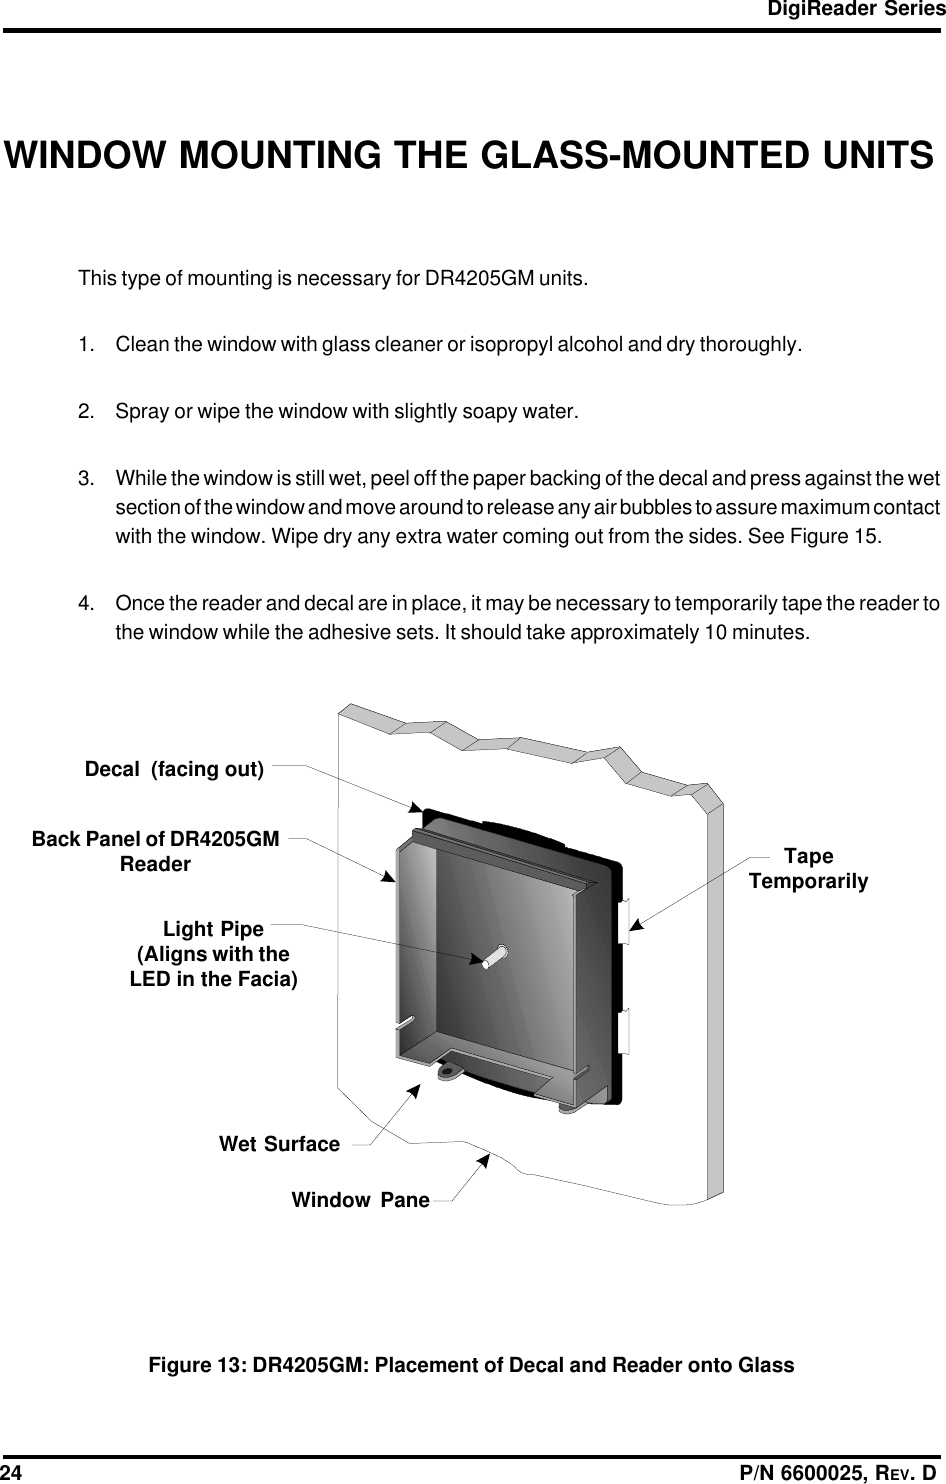 DigiReader Series24                                                                                                                  P/N 6600025, REV. DWINDOW MOUNTING THE GLASS-MOUNTED UNITSThis type of mounting is necessary for DR4205GM units.1. Clean the window with glass cleaner or isopropyl alcohol and dry thoroughly.2. Spray or wipe the window with slightly soapy water.3. While the window is still wet, peel off the paper backing of the decal and press against the wetsection of the window and move around to release any air bubbles to assure maximum contactwith the window. Wipe dry any extra water coming out from the sides. See Figure 15.4. Once the reader and decal are in place, it may be necessary to temporarily tape the reader tothe window while the adhesive sets. It should take approximately 10 minutes.Figure 13: DR4205GM: Placement of Decal and Reader onto GlassDecal  (facing out)Back Panel of DR4205GMReaderLight Pipe(Aligns with theLED in the Facia)Wet SurfaceWindow PaneTapeTemporarily